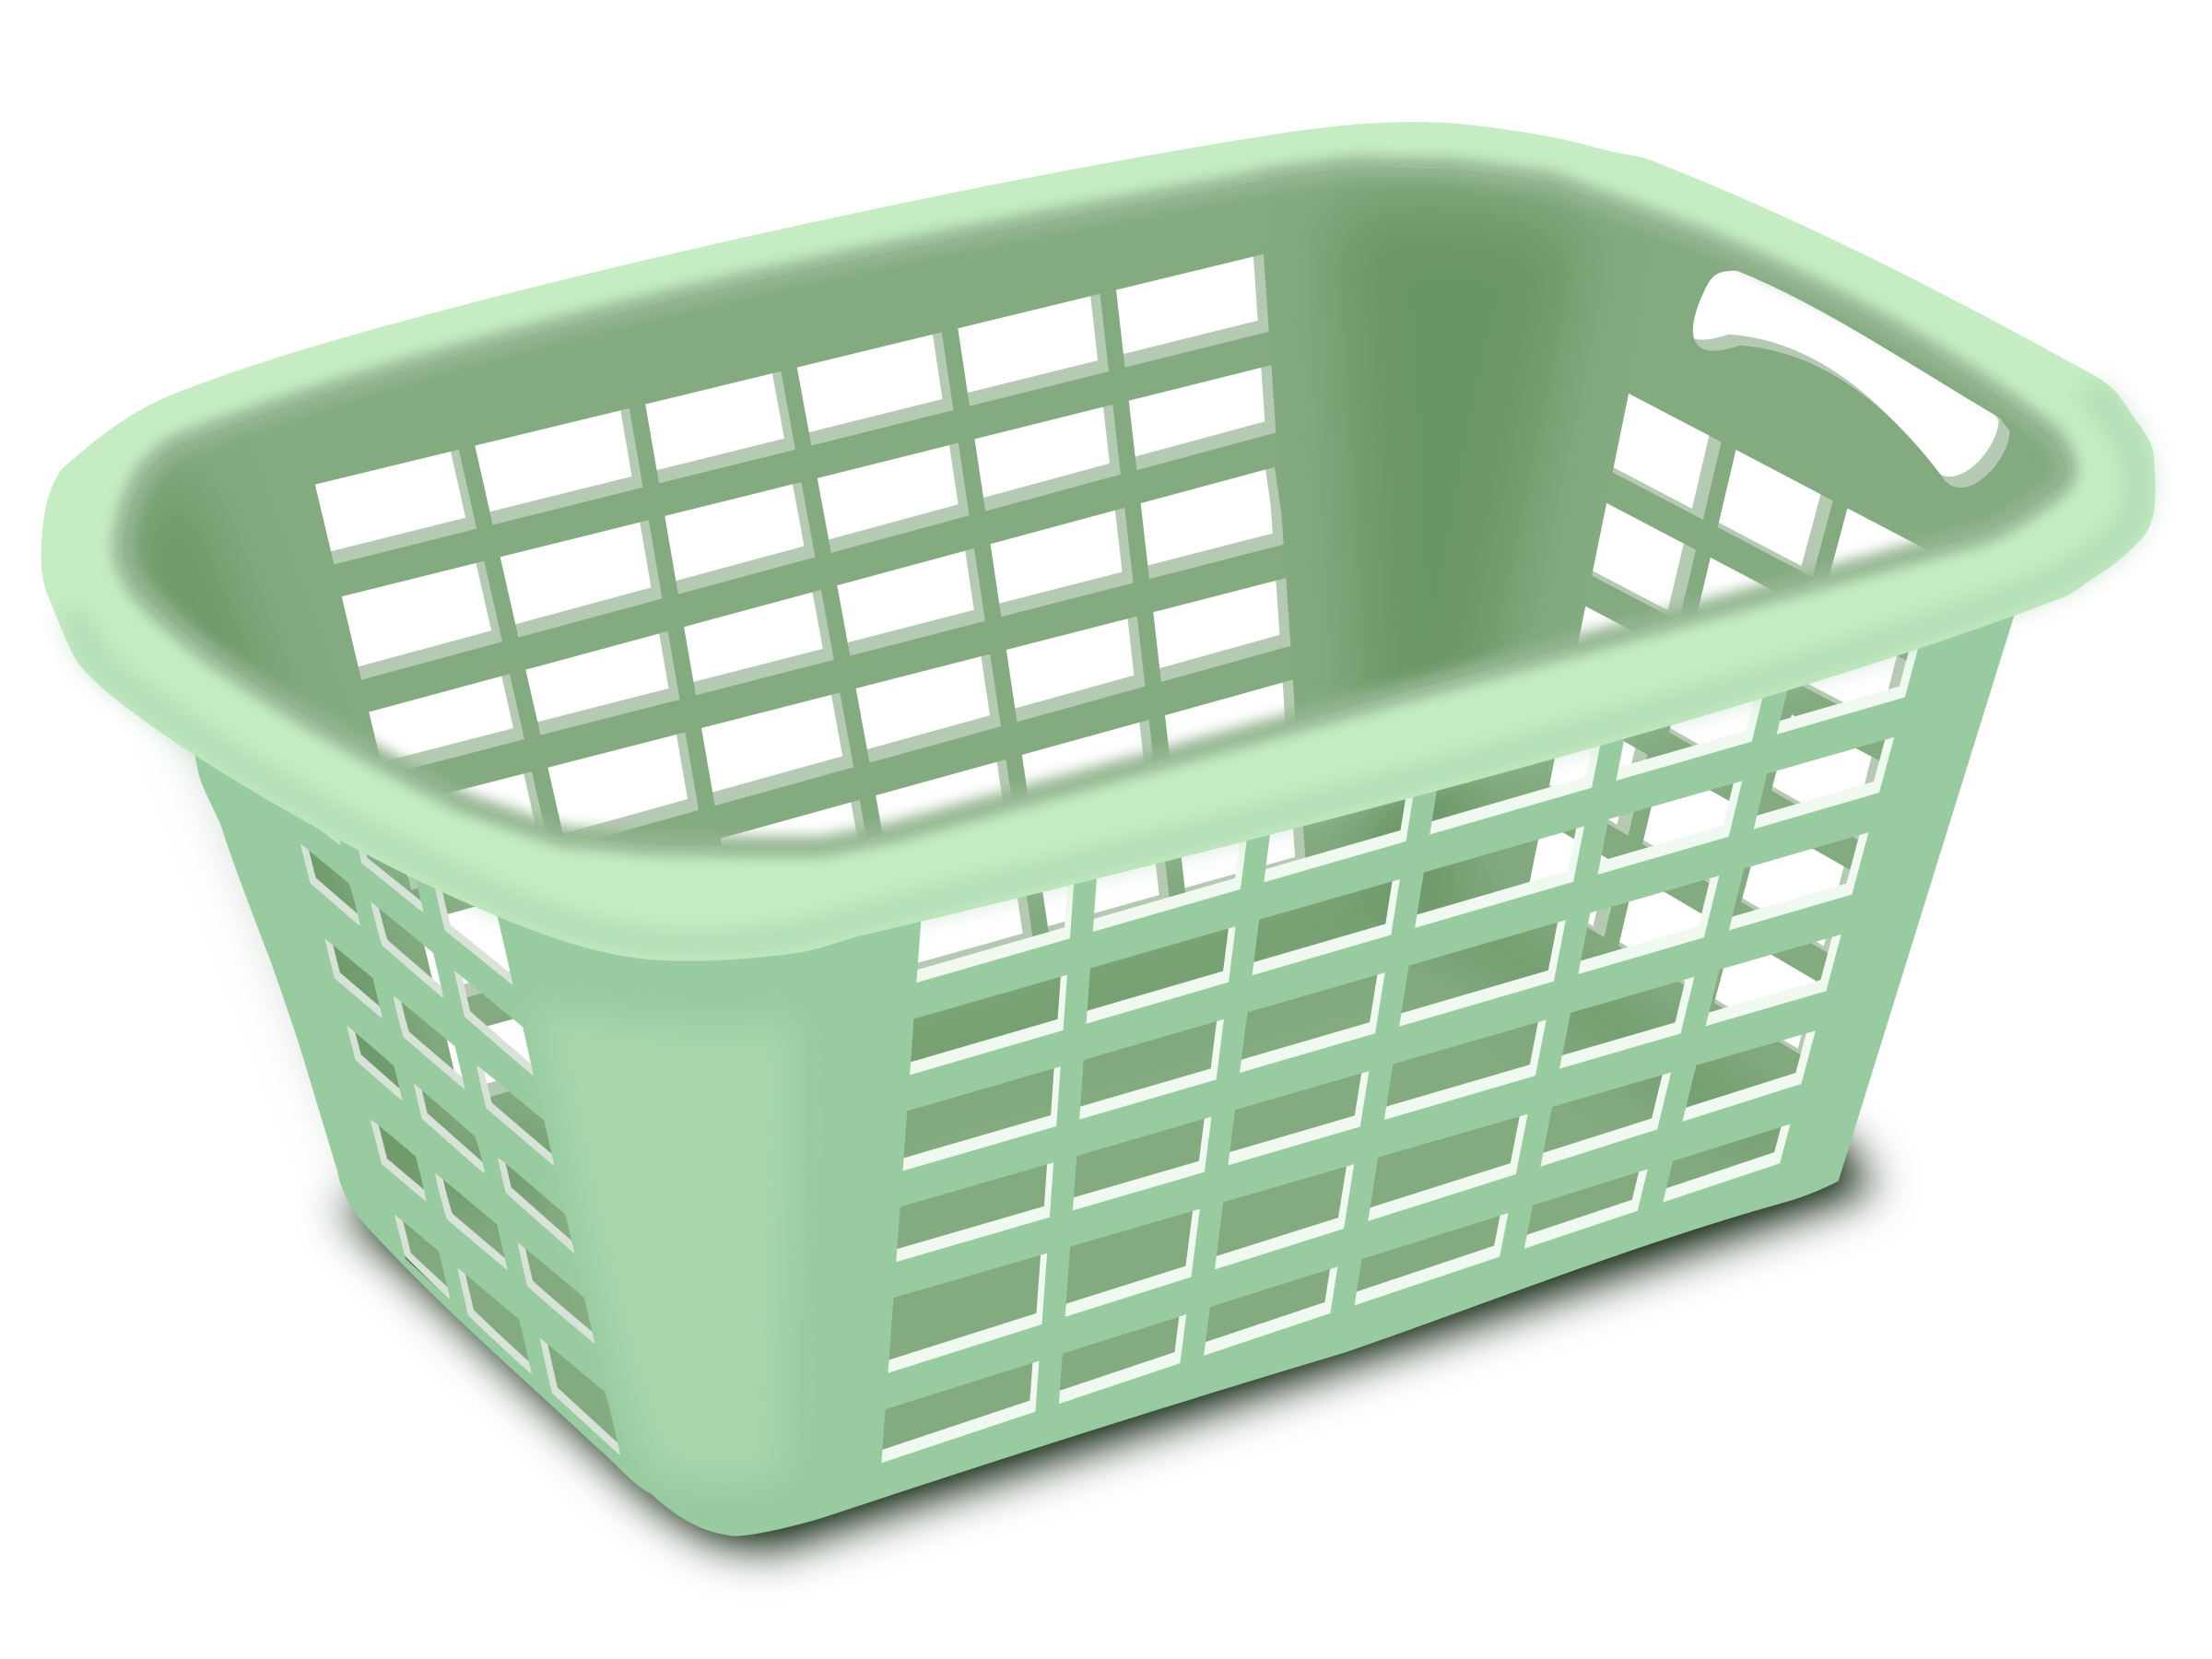 Clothes in a basket clipart 